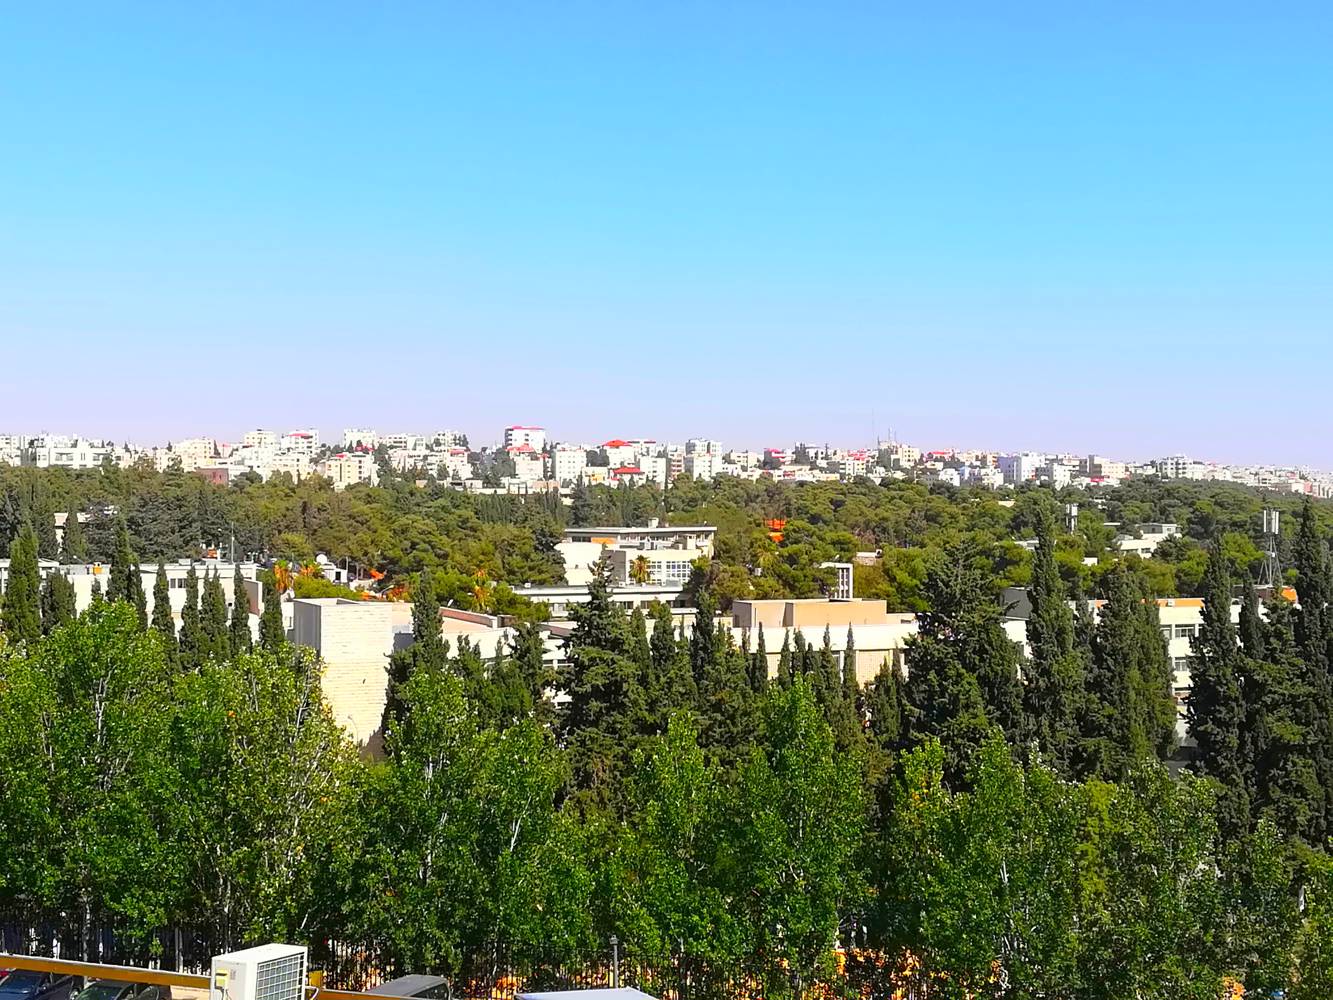 A view over the University of Jordan campus. Photo: Malkawi99 CC BY via Wikimedia Commons